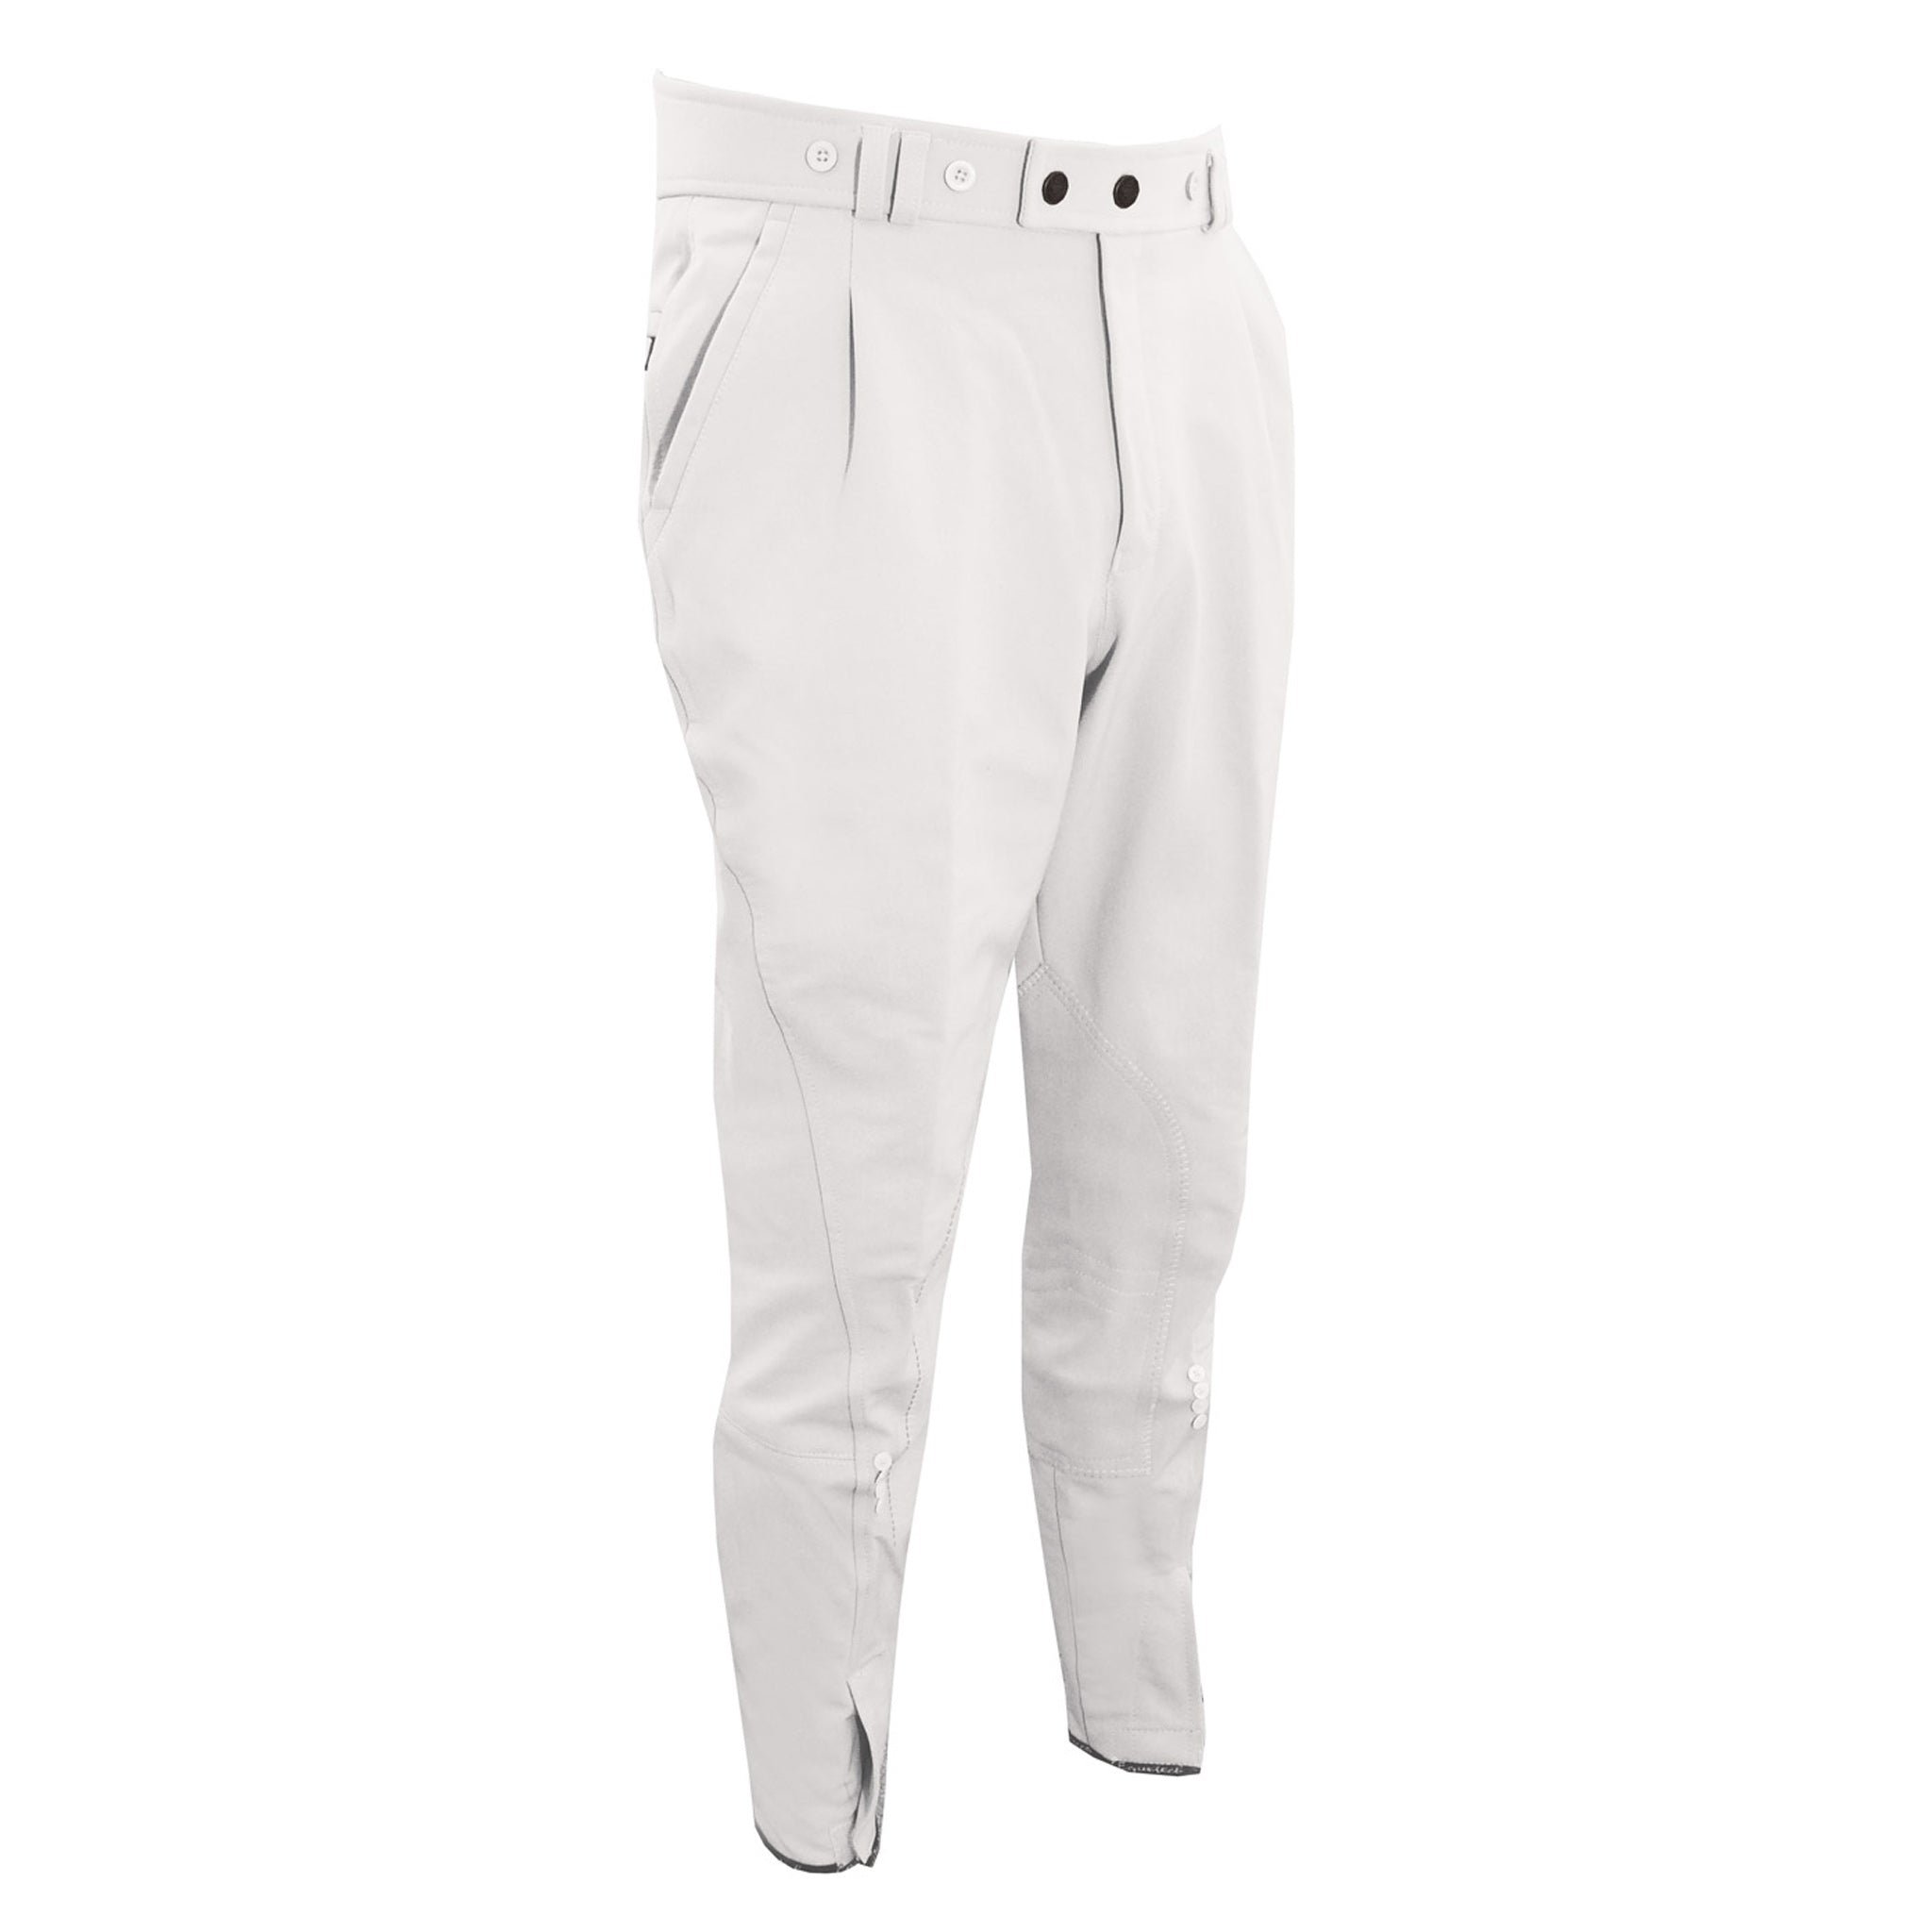 Men's Competition Breeches | Free UK Delivery Available at EQUUS